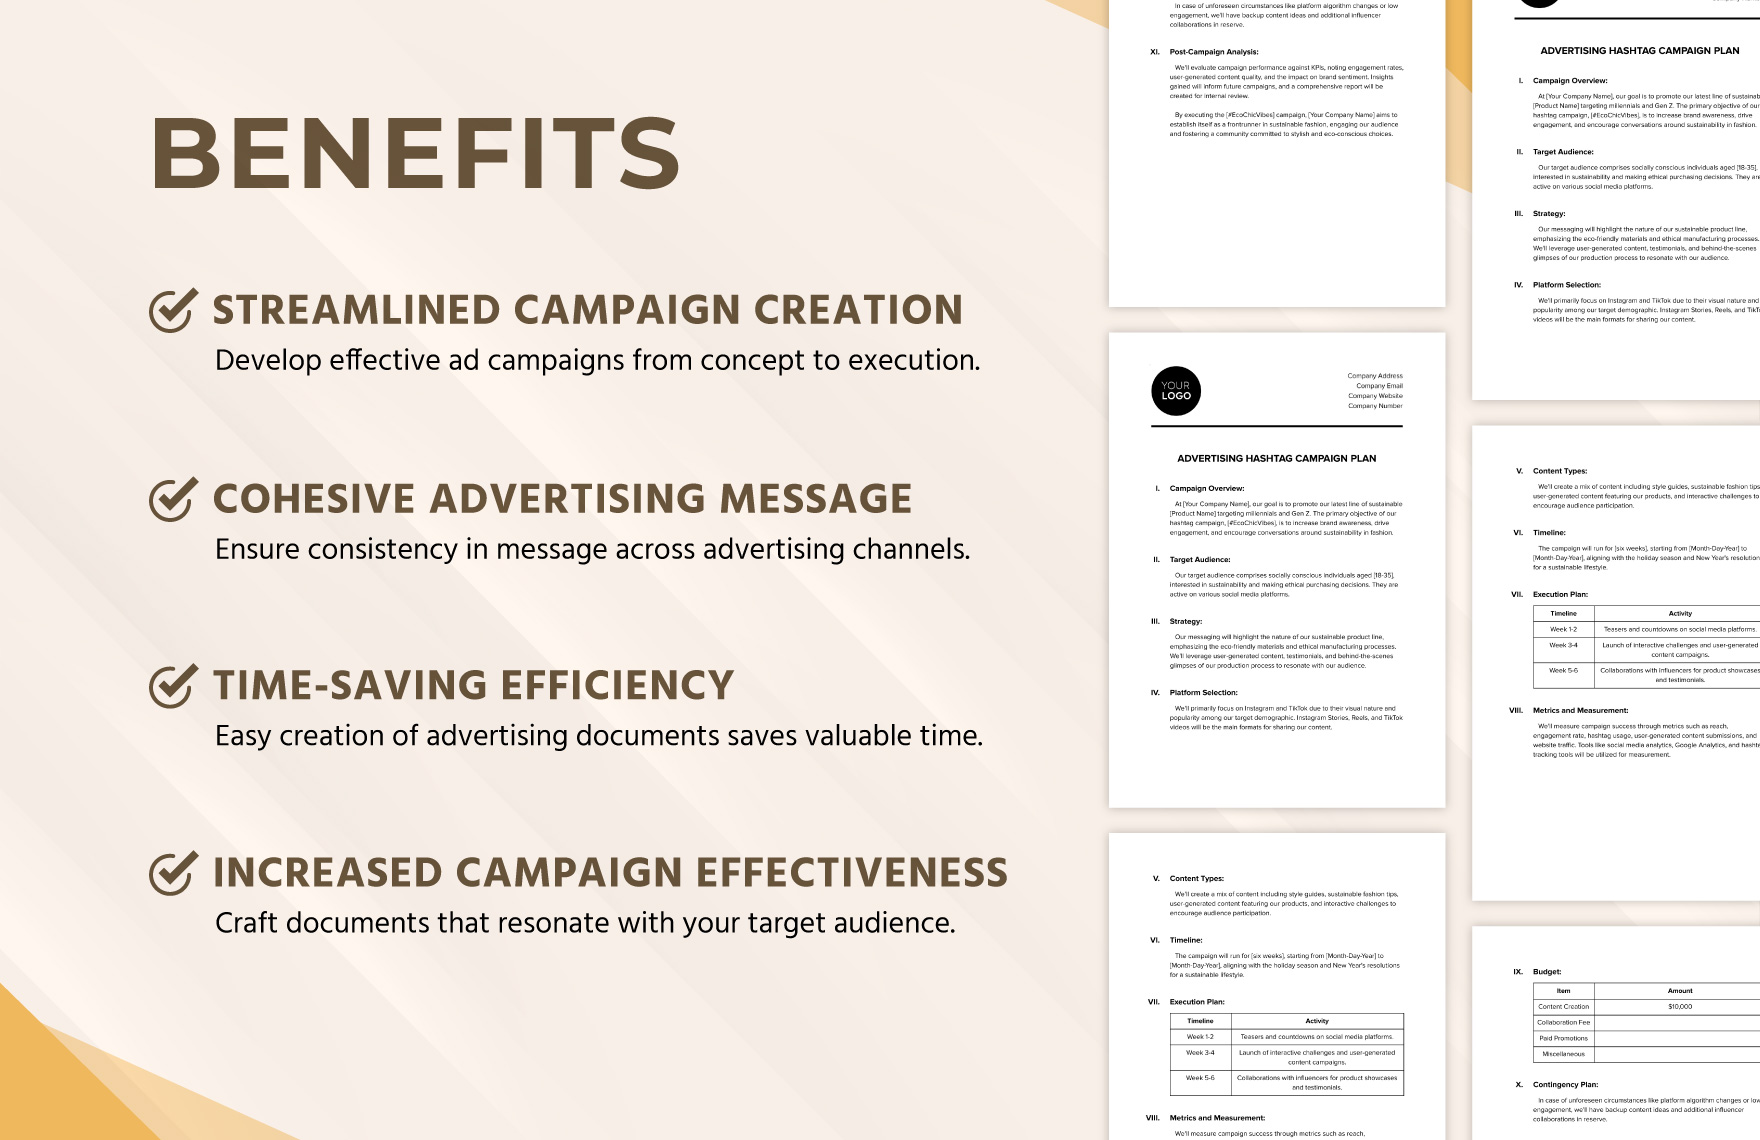 Advertising Hashtag Campaign Plan Template